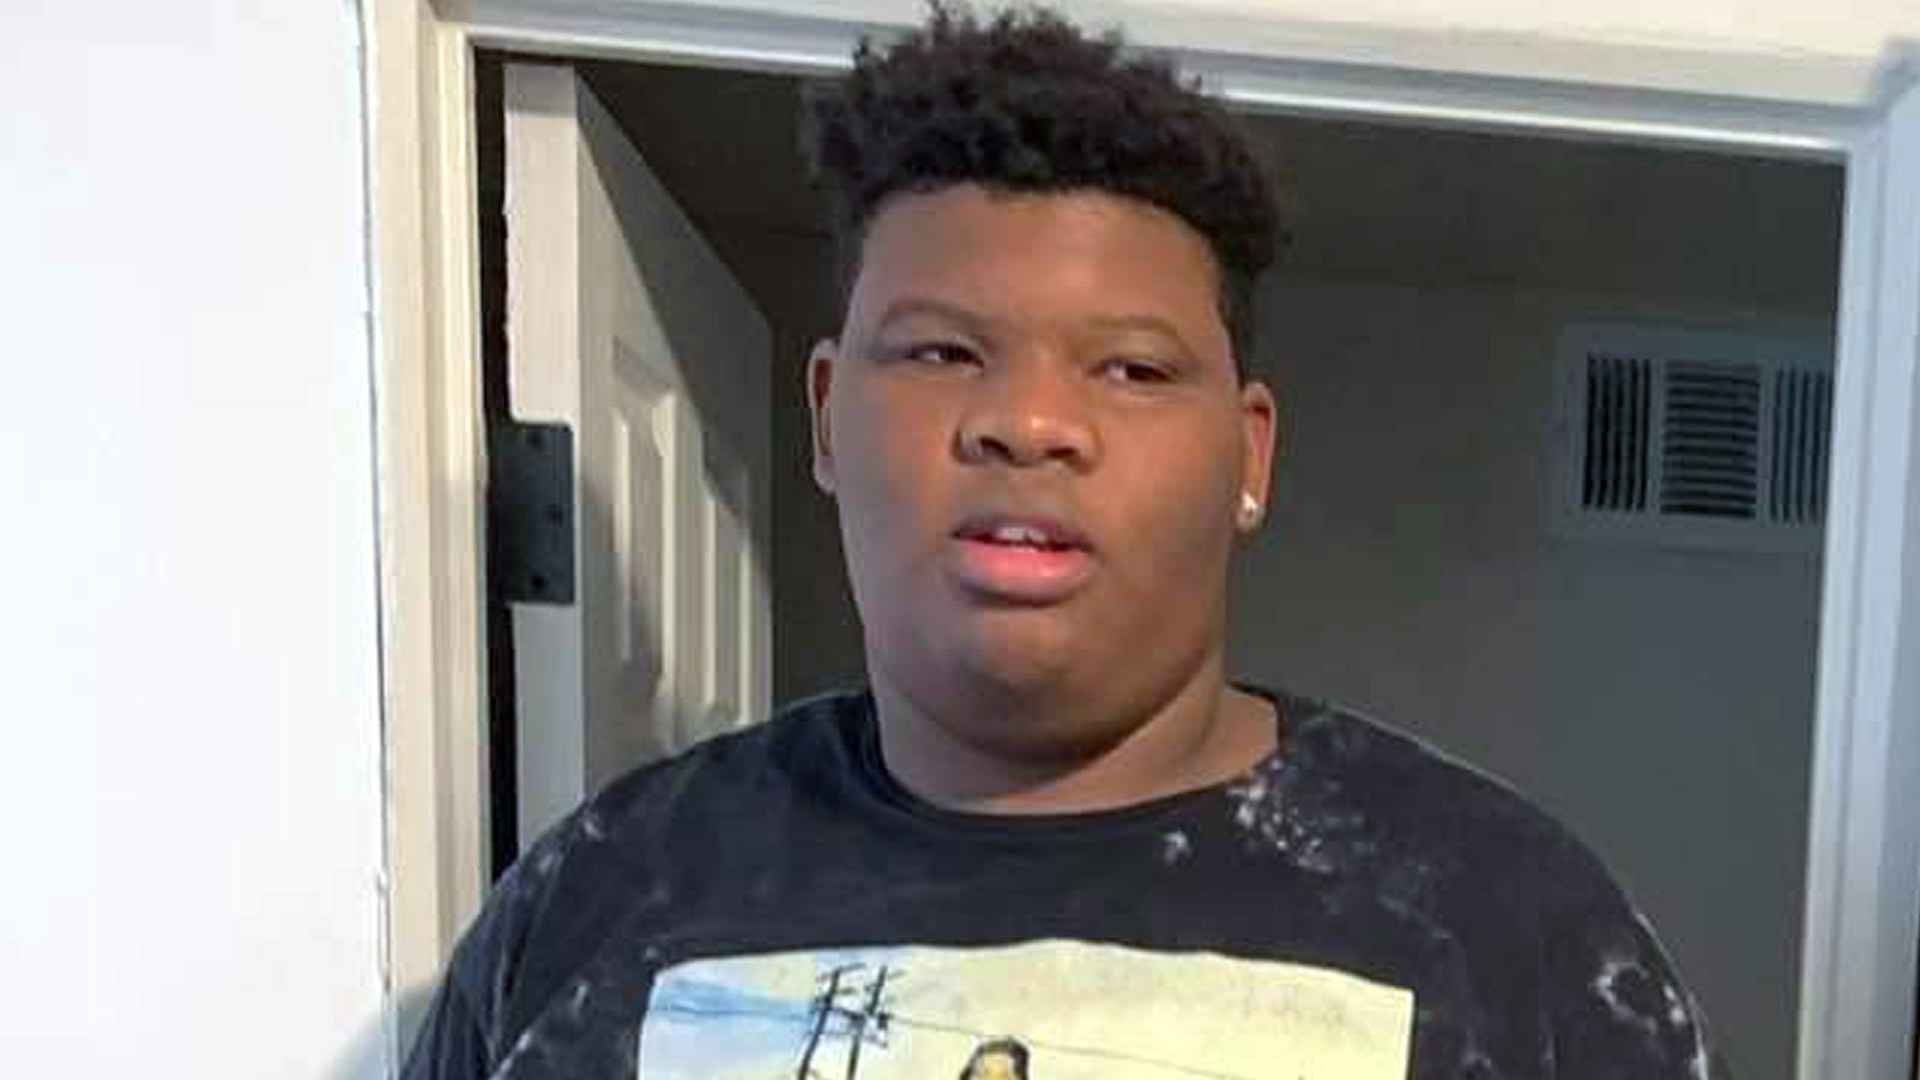 The father of 14-year-old Tyre Sampson, who was killed when he fell from an amusement park ride in Orlando, said he feels as though his world has suddenly stopped.